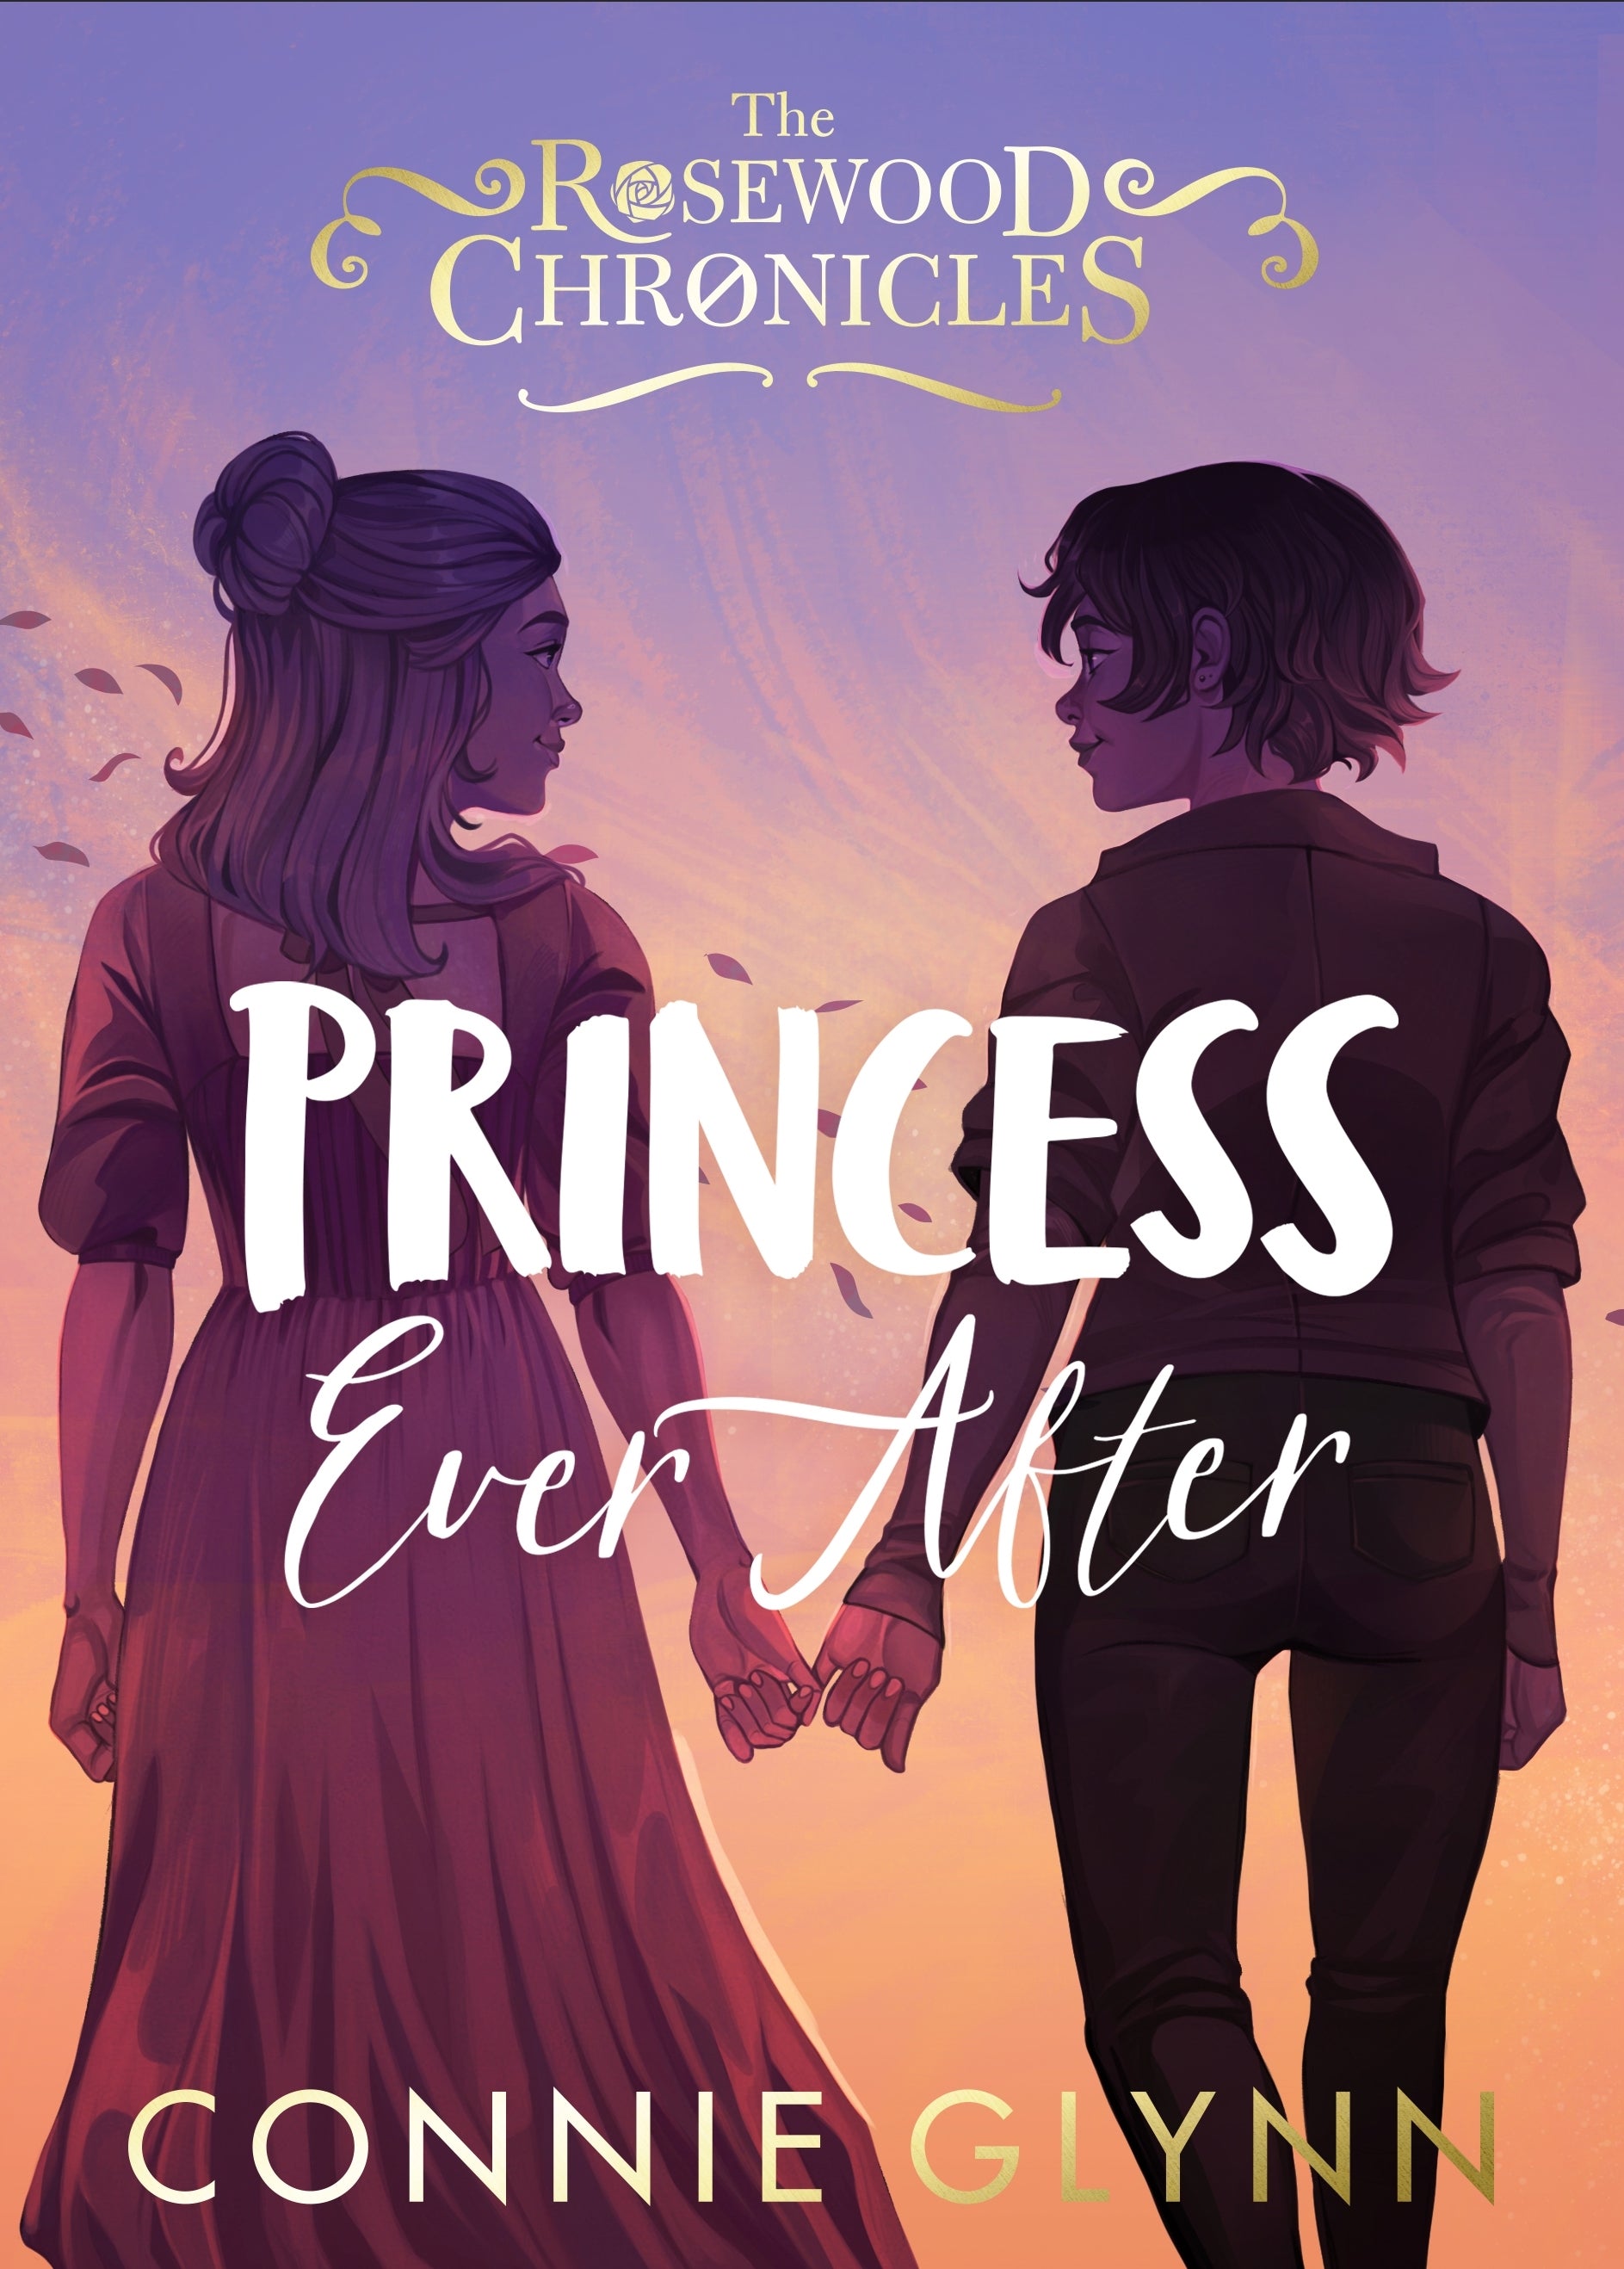 The Rosewood Chronicles#3: Princess Ever After Connie Glynn